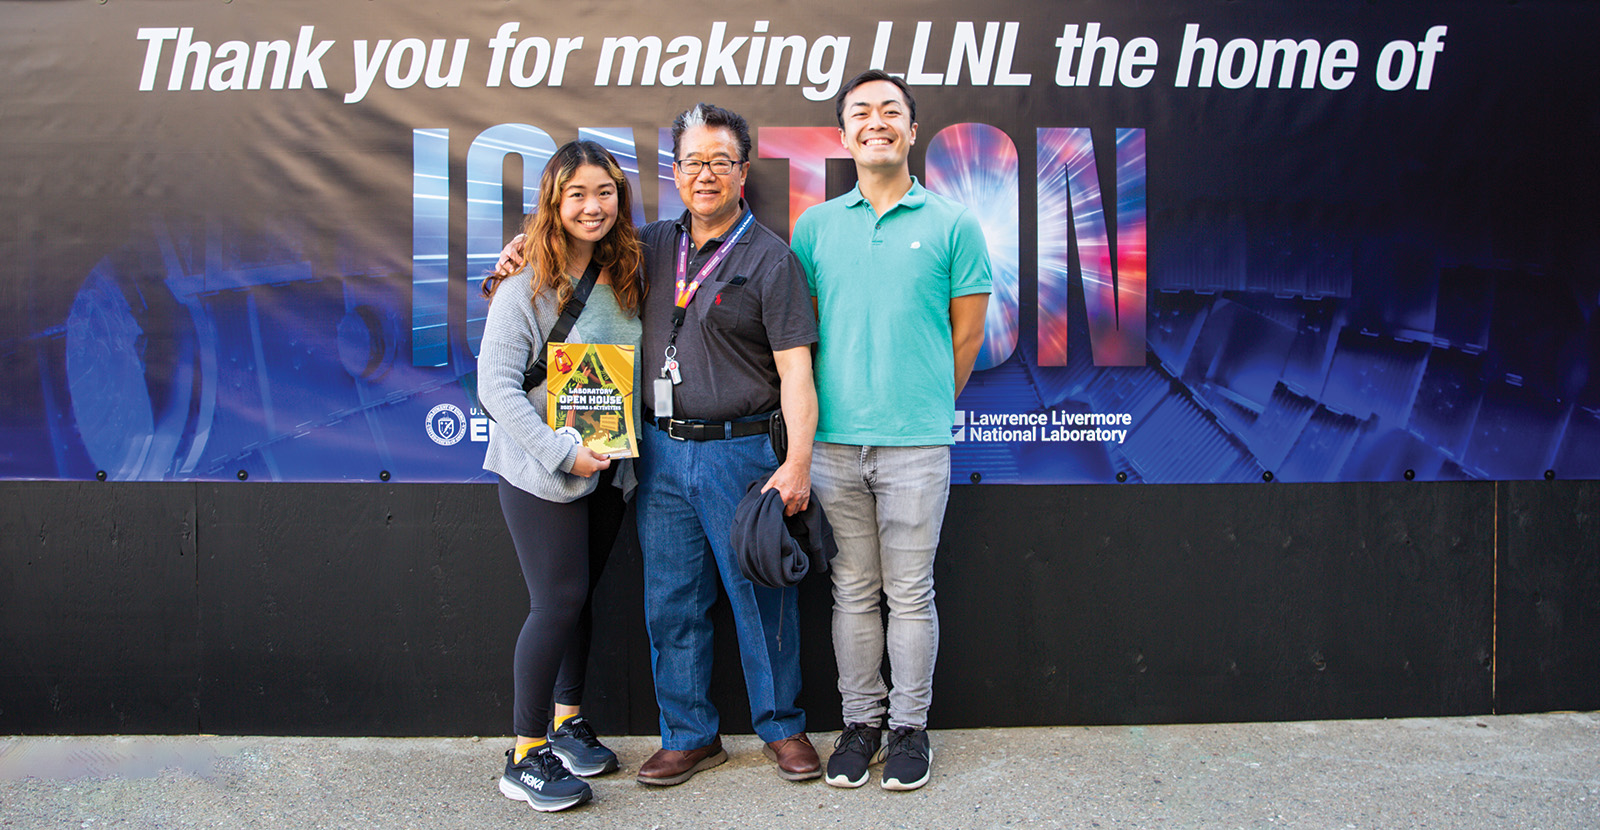 At the Open House, an LLNL employee and guests pose by a poster thanking all employees for their contributions that enabled achievement of ignition.